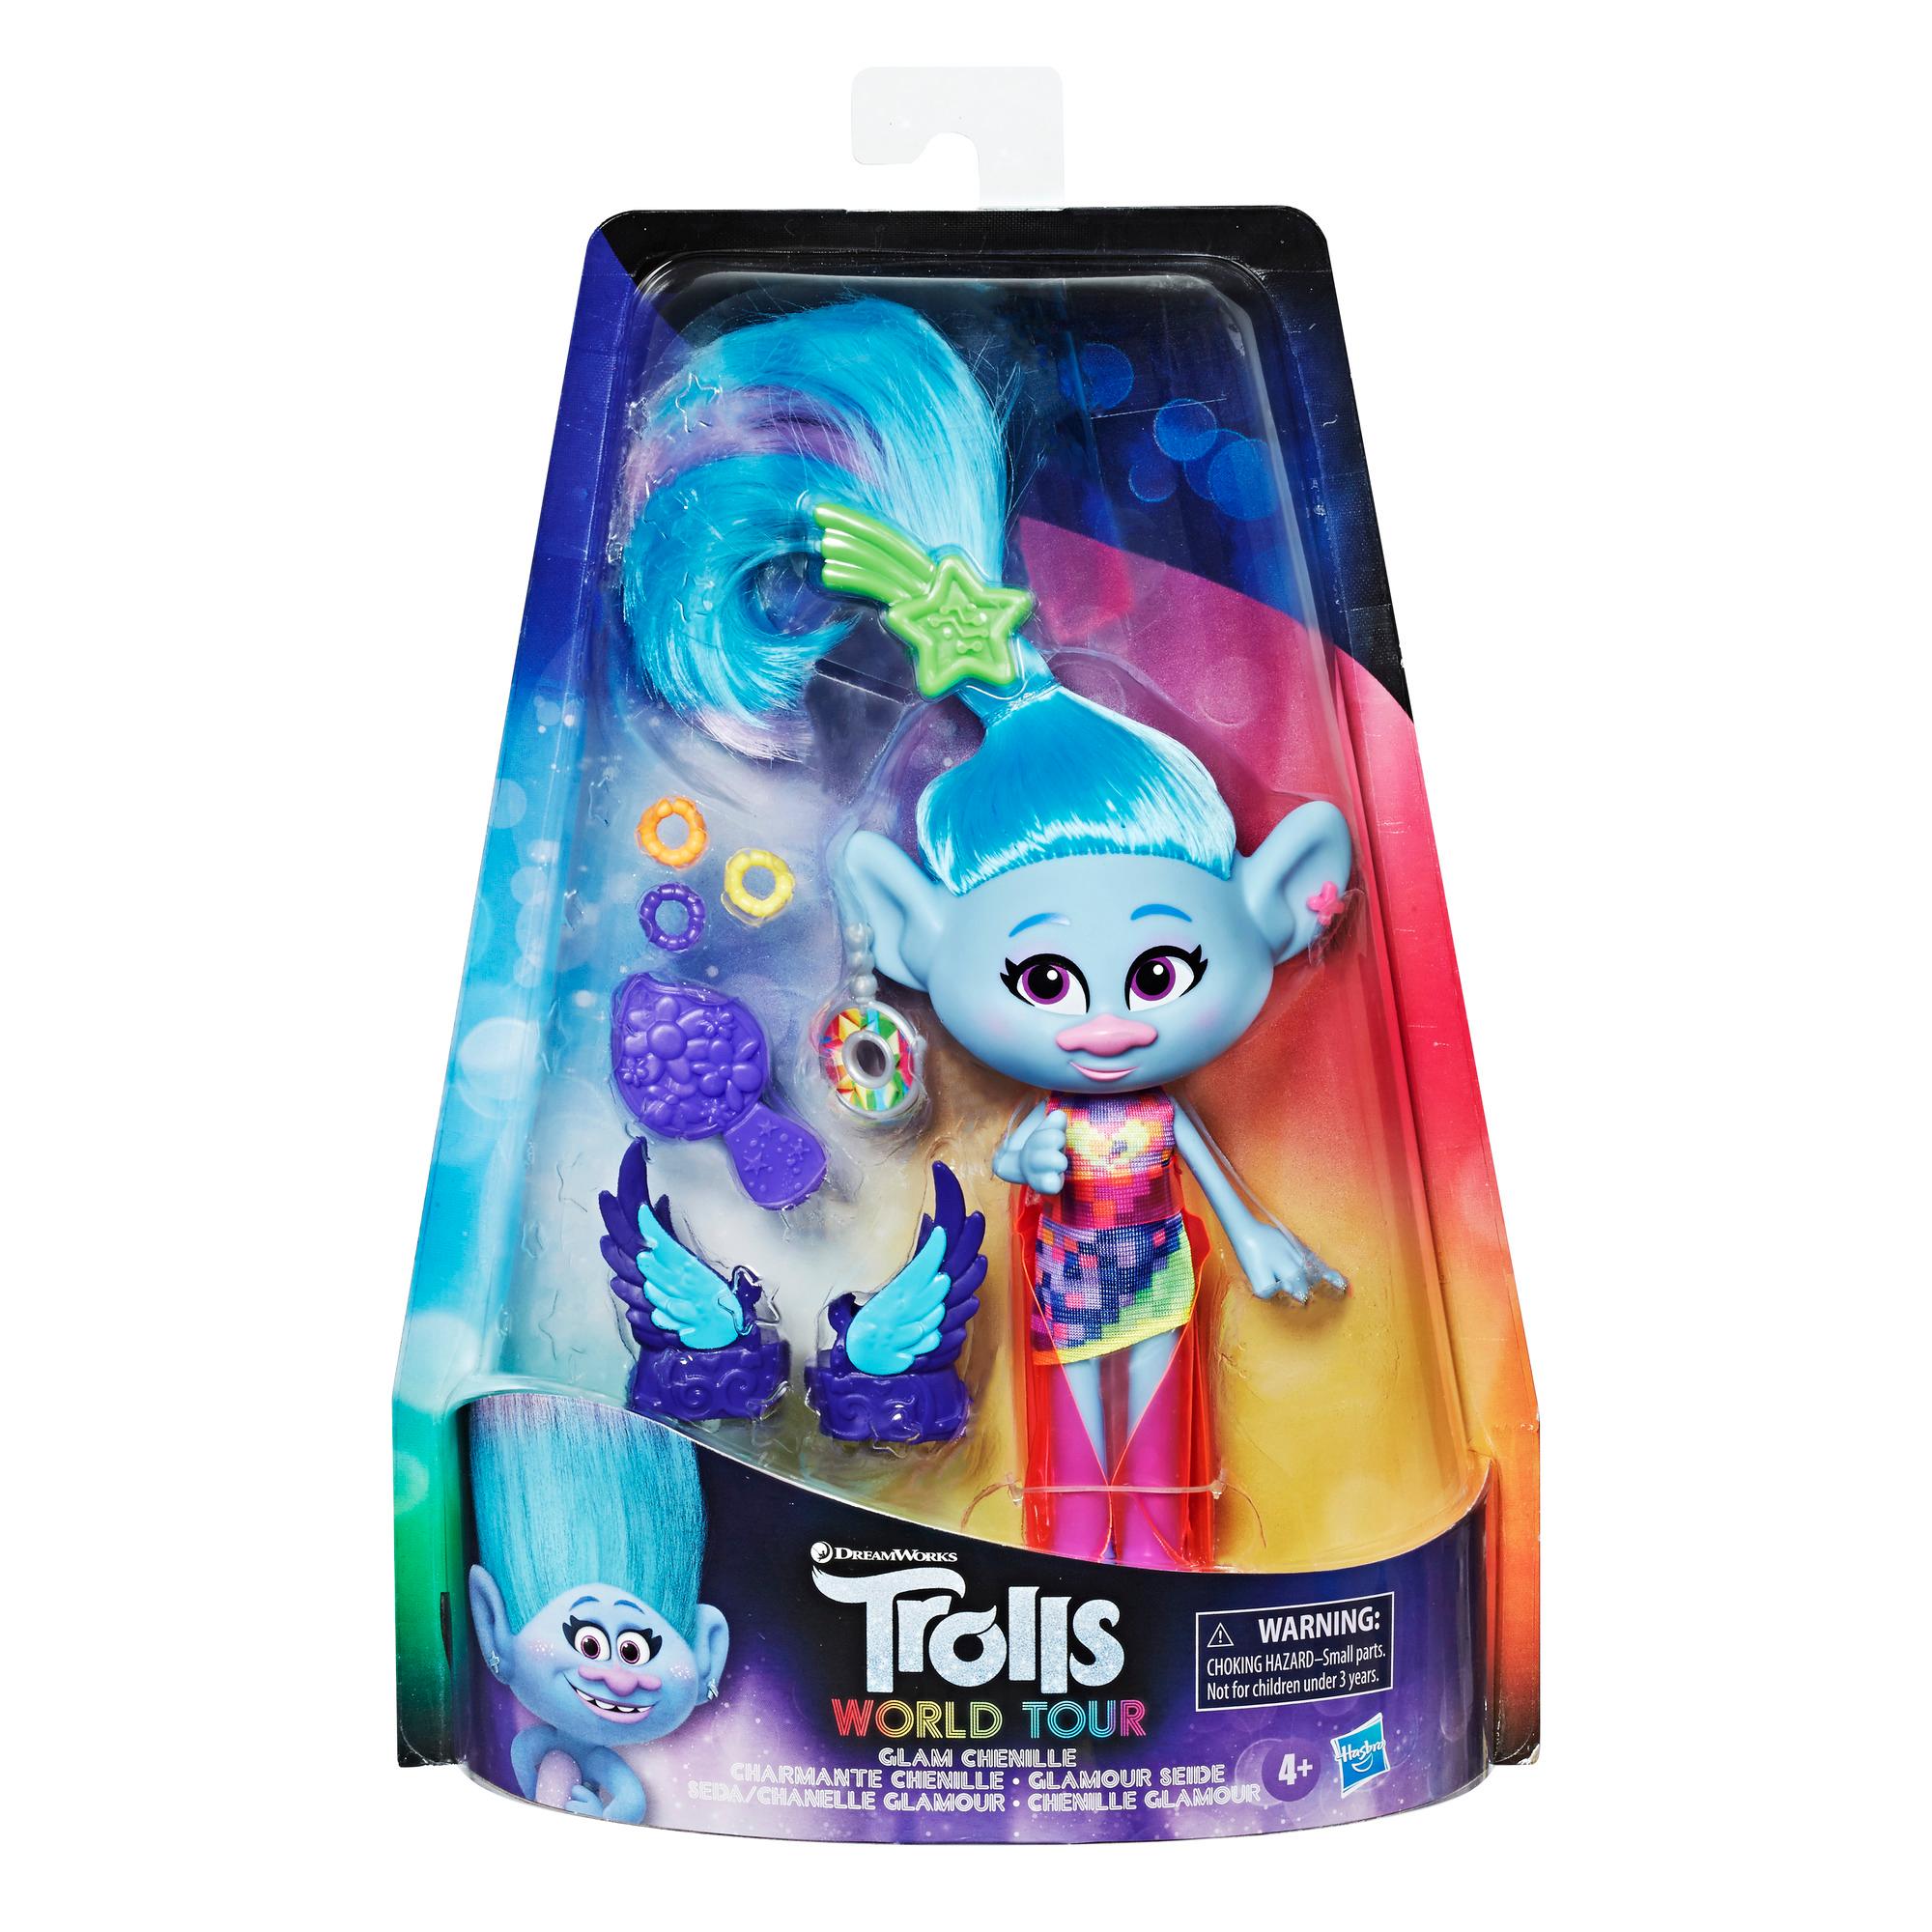 DreamWorks Trolls Glam Chenille Fashion Doll with Dress and More, Inspired by the Movie Trolls World Tour, Toy for Girls